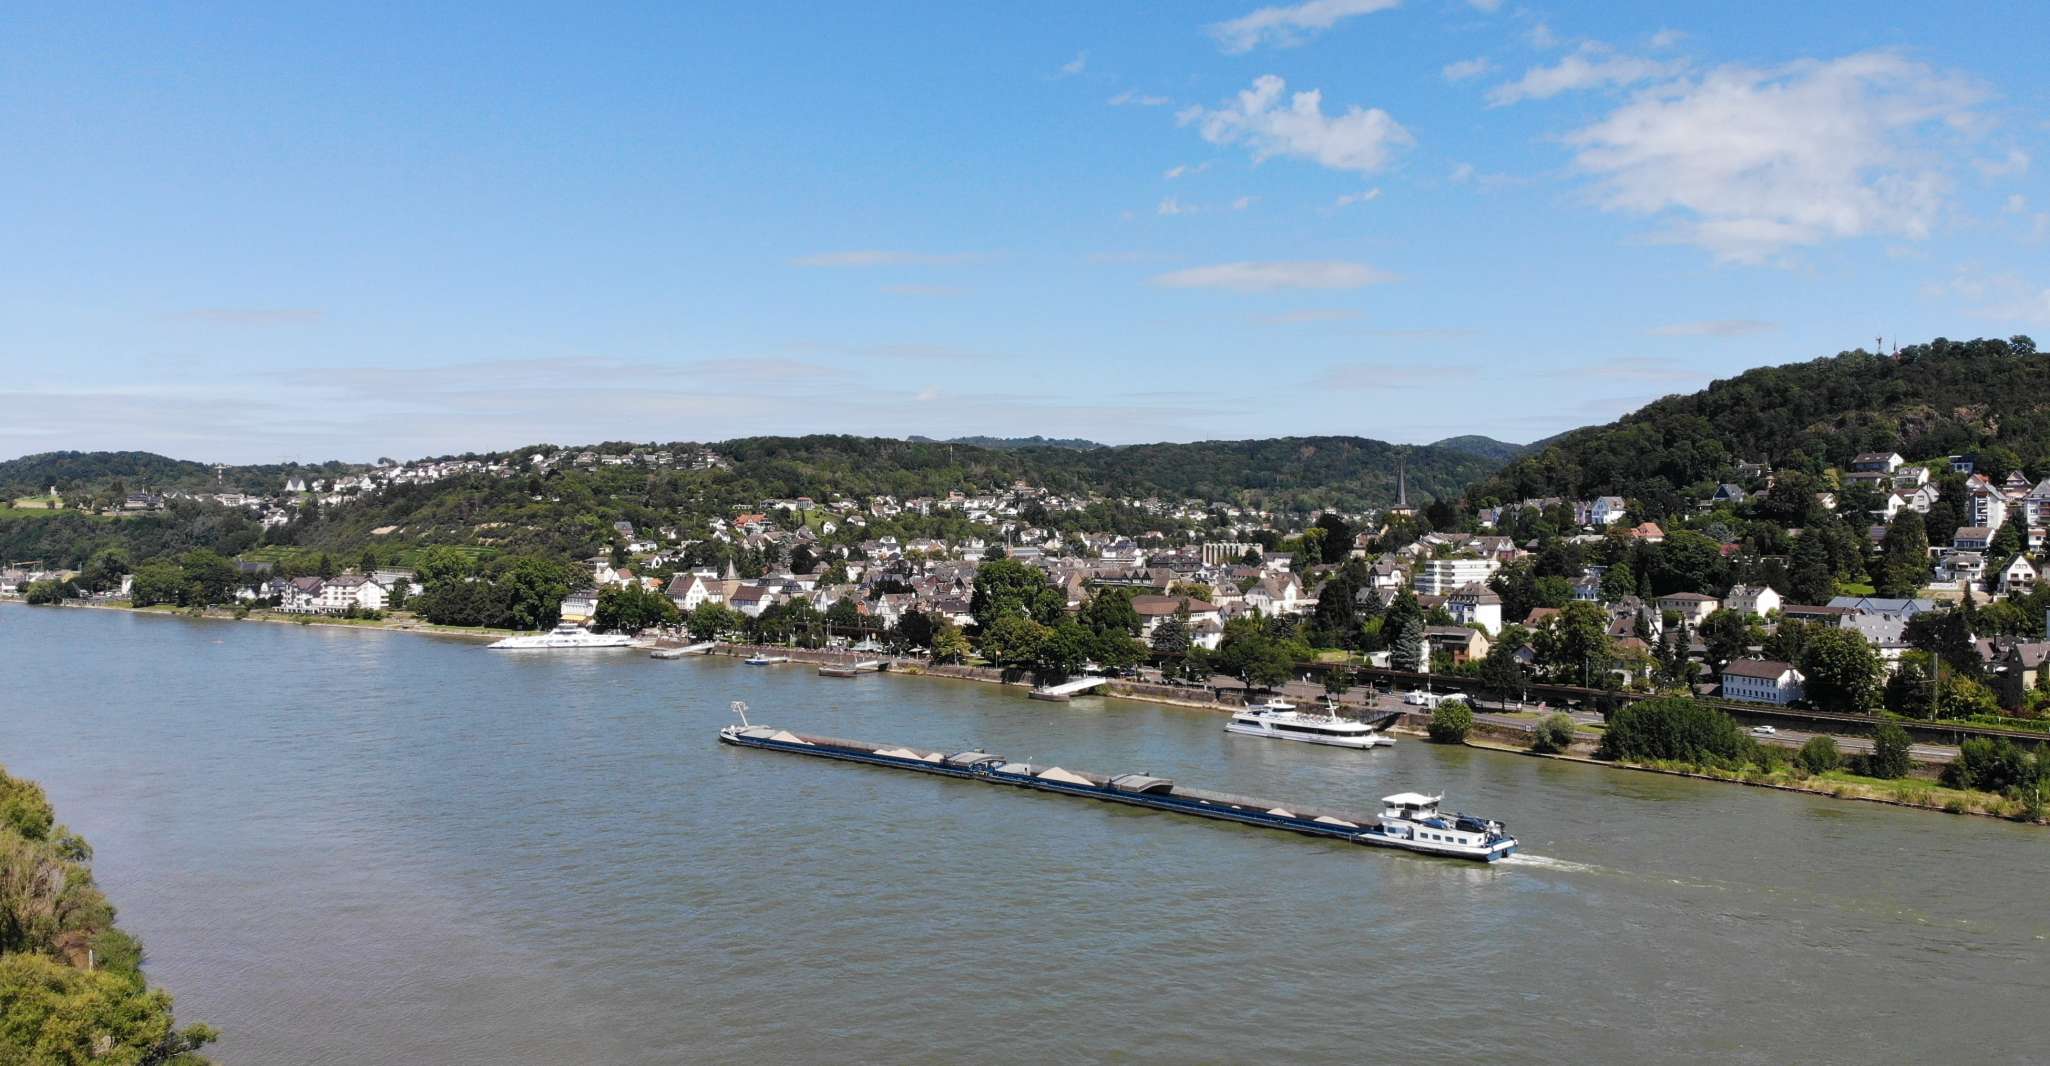 From Bonn, Rhine River to Linz Sightseeing Boat Tour - Housity